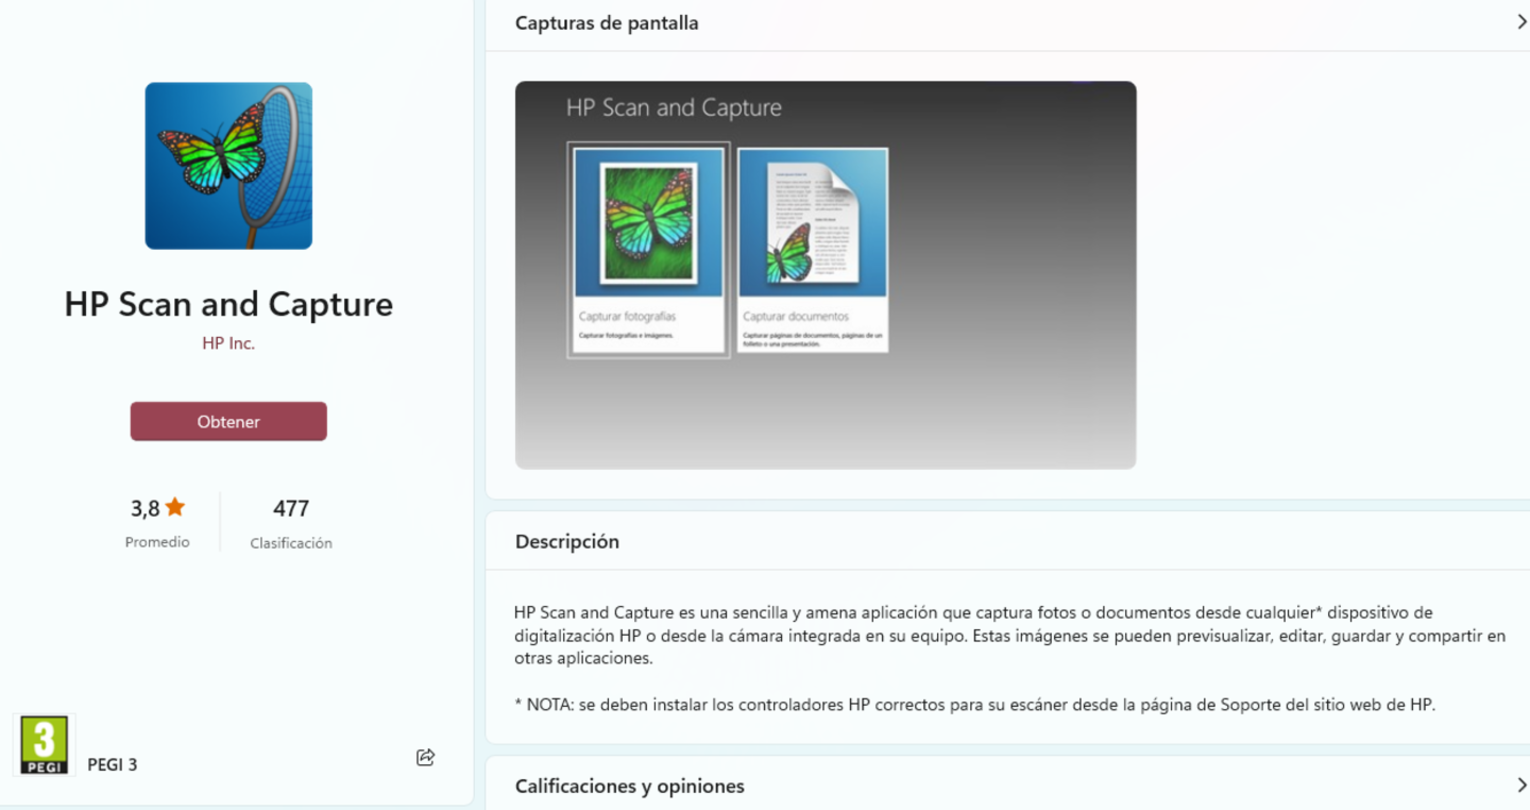 HP Scan and Capture app in the Windows App Store.